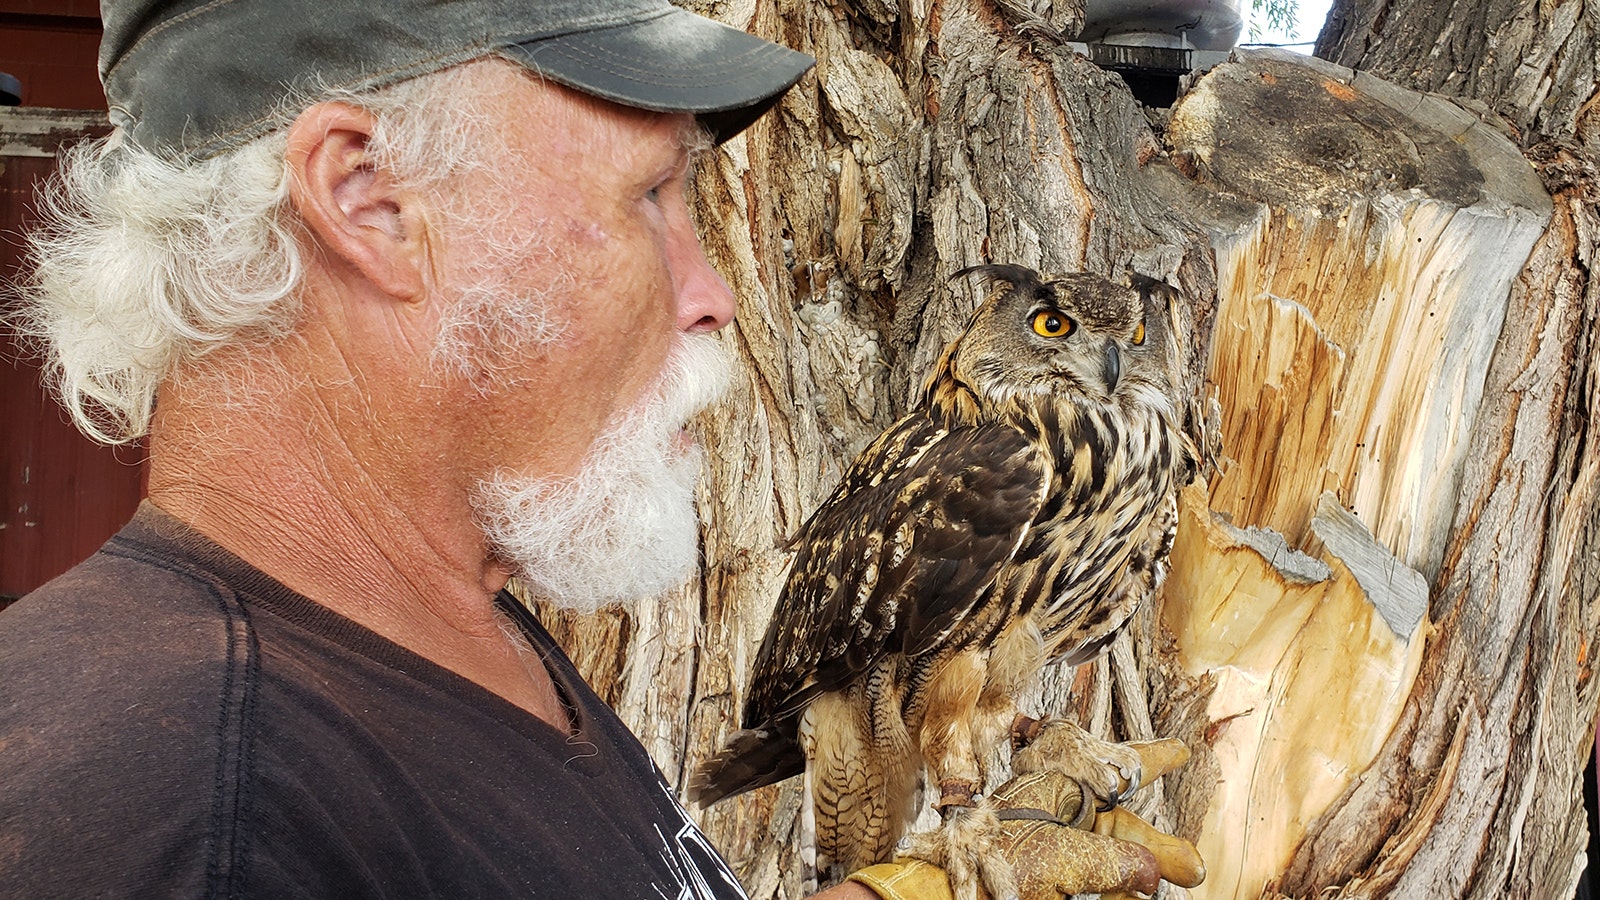 Jeff Shelburg and his famous Hoot owl.